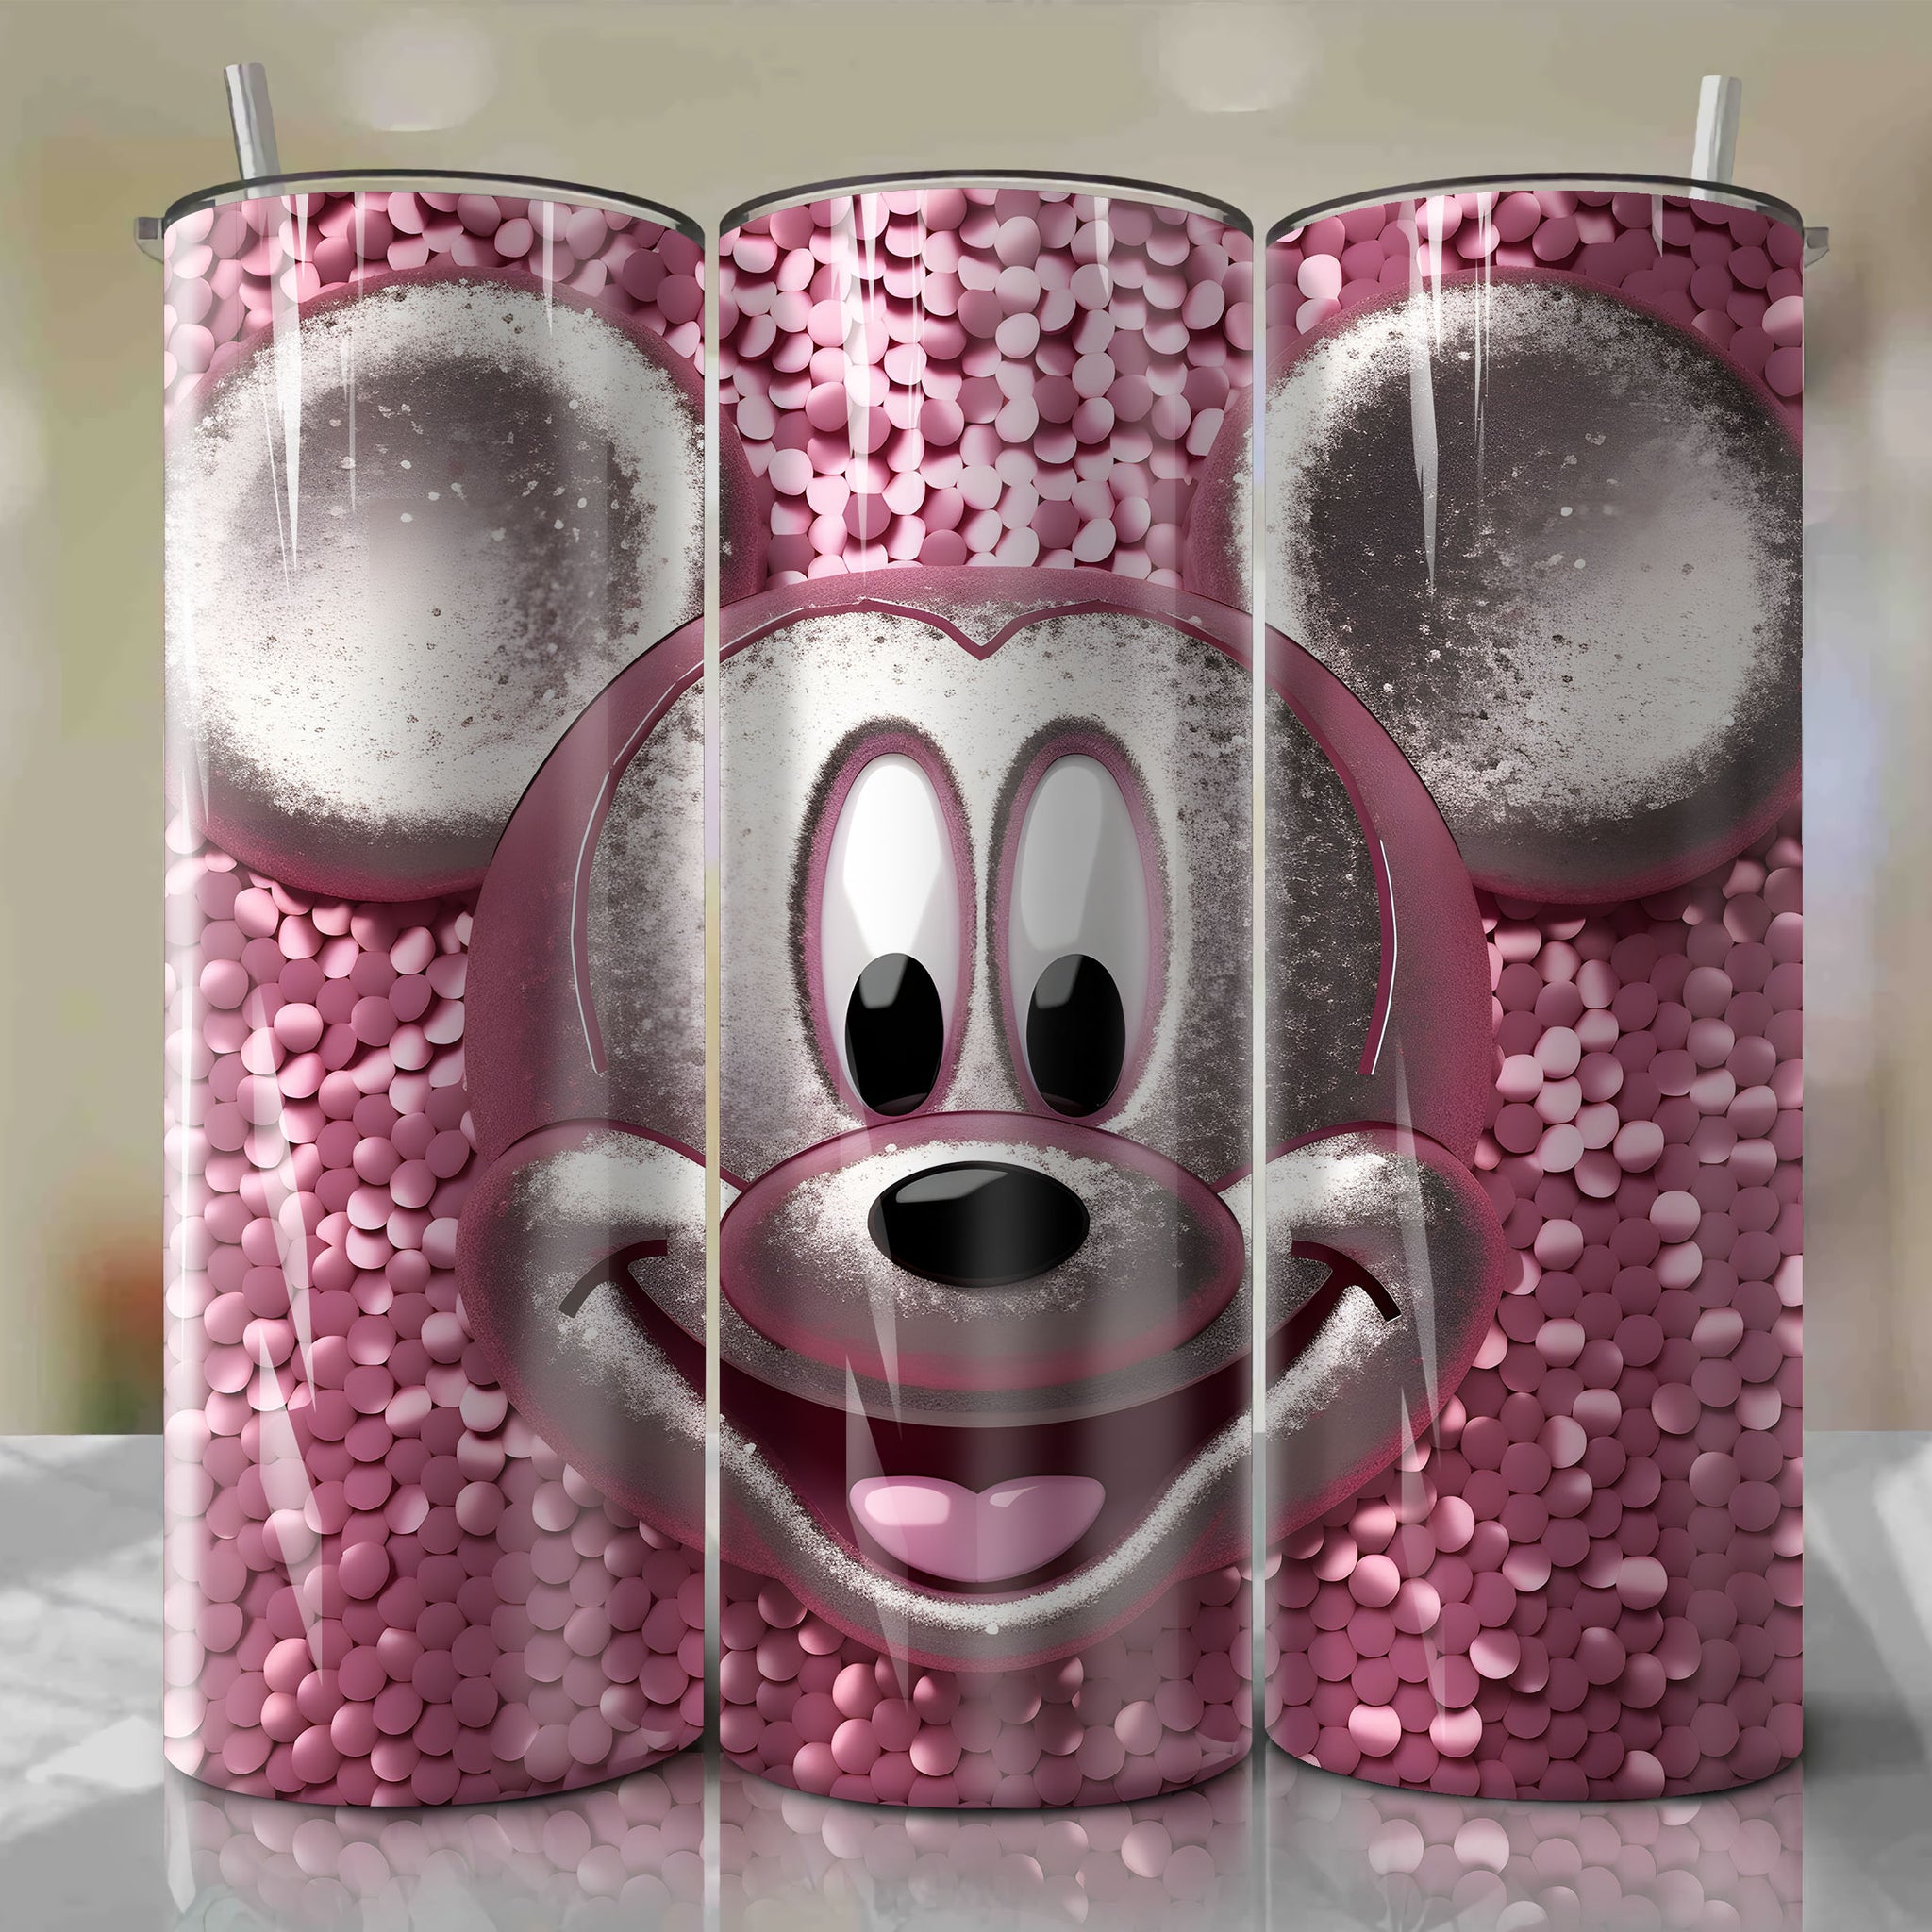 Whimsical 3D Bling Mickey Mouse Face Artwork - Digital Download for Sublimation Projects